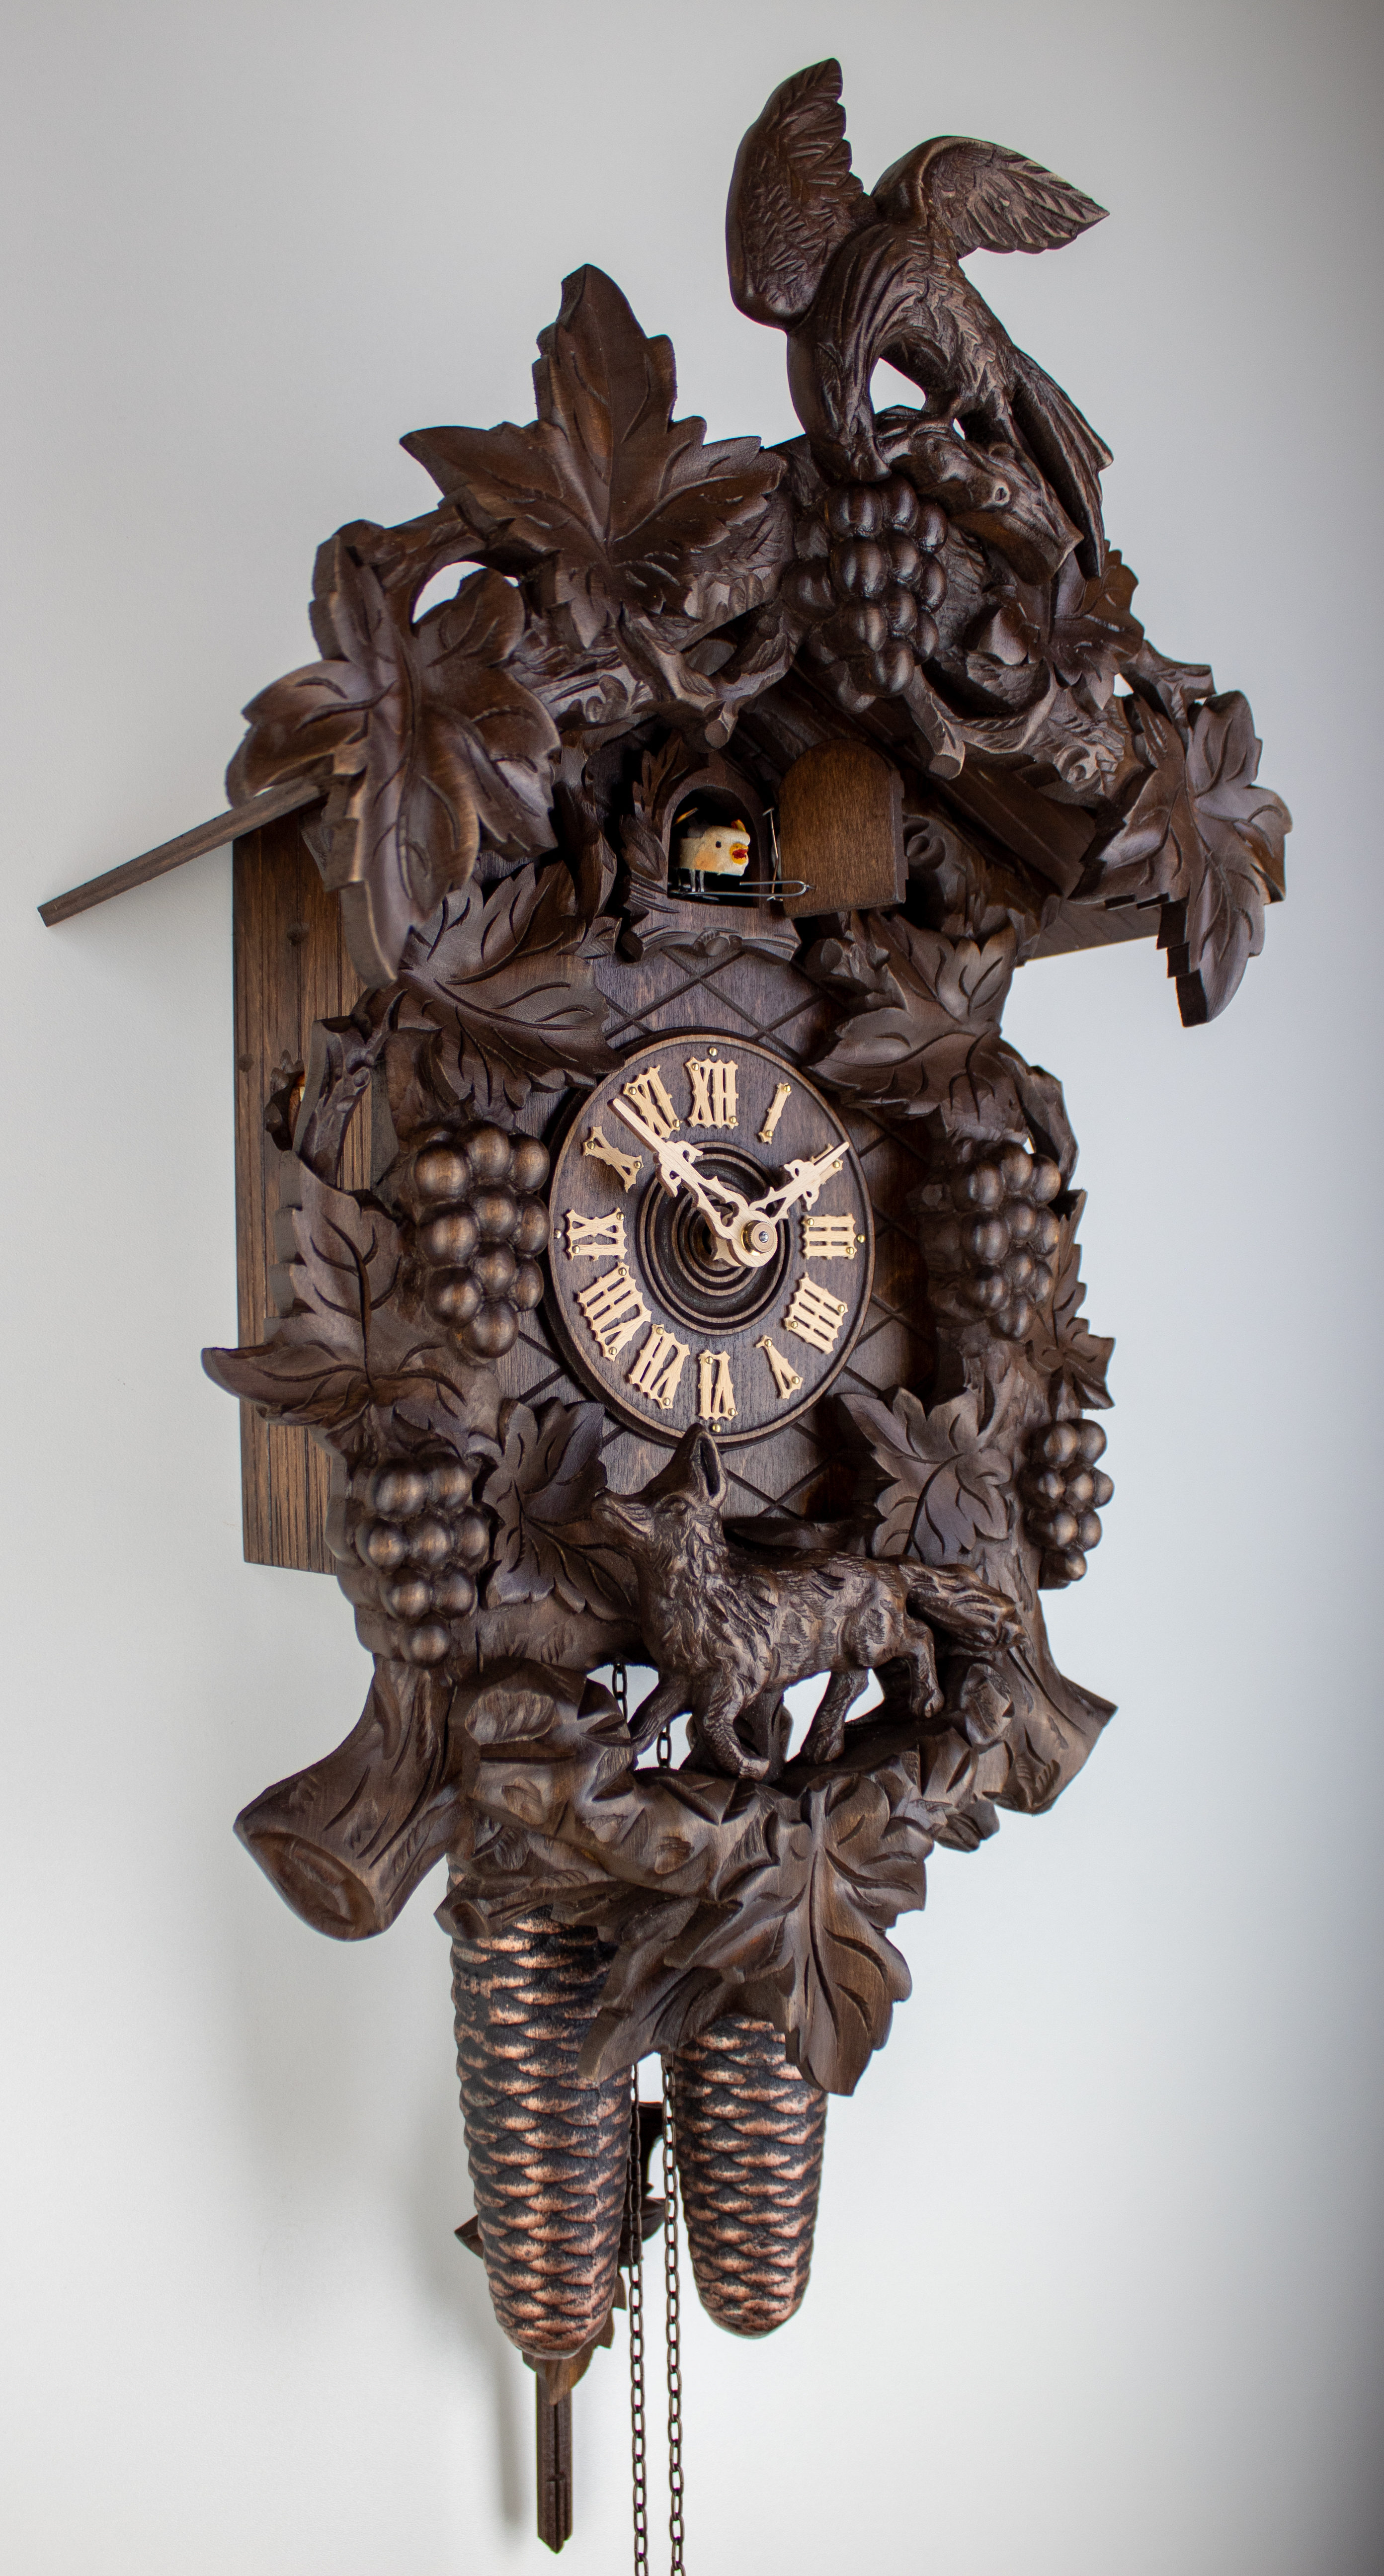 8 Days Cuckoo Clock with fox and grapes